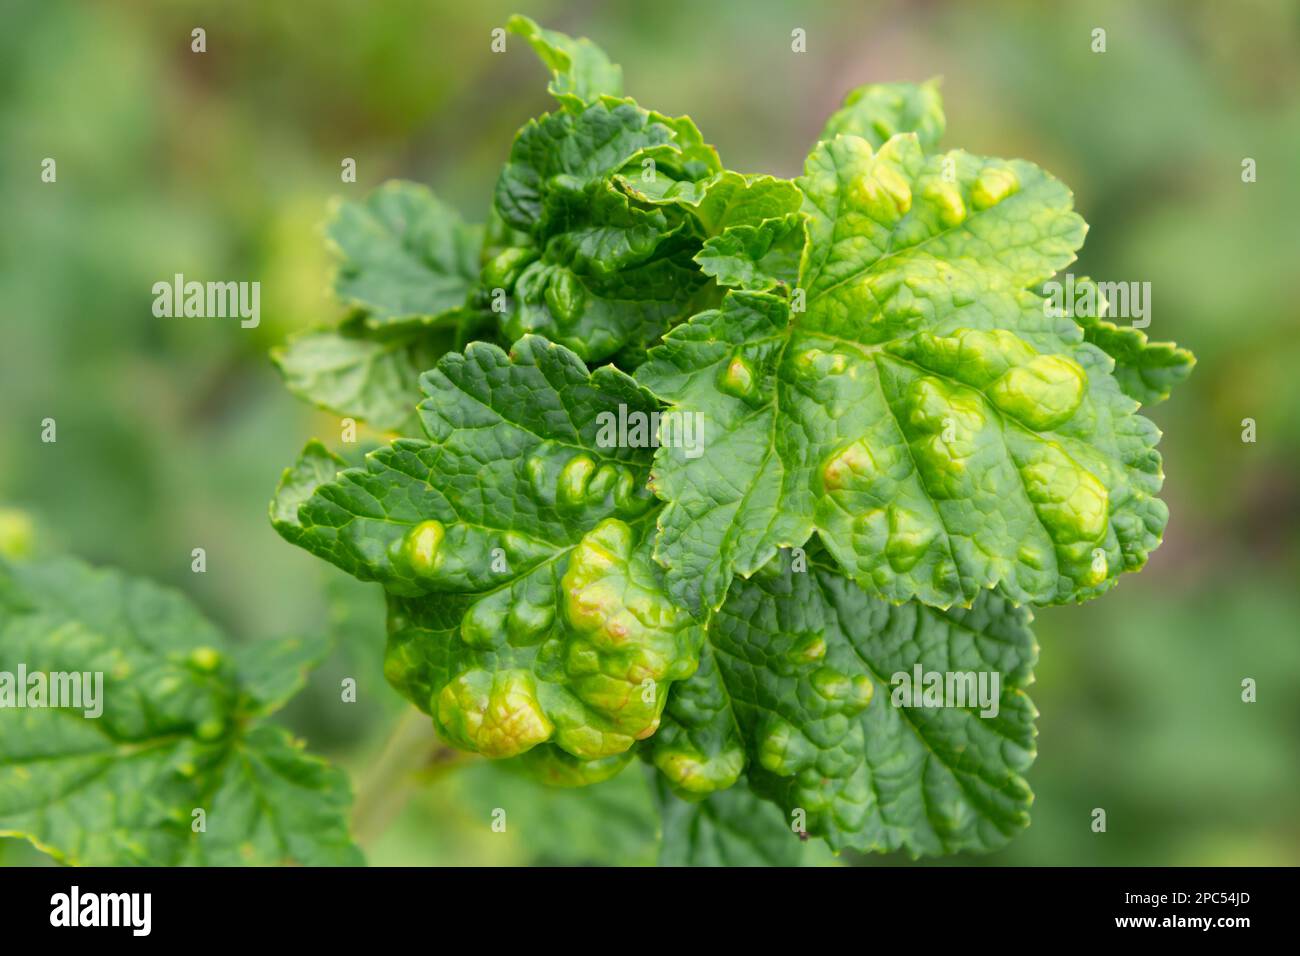 Gallic aphid on the leaves of red currant. The pest damages the currant leaves, red bumps on the leaves of the bush from the parasite disease. Stock Photo